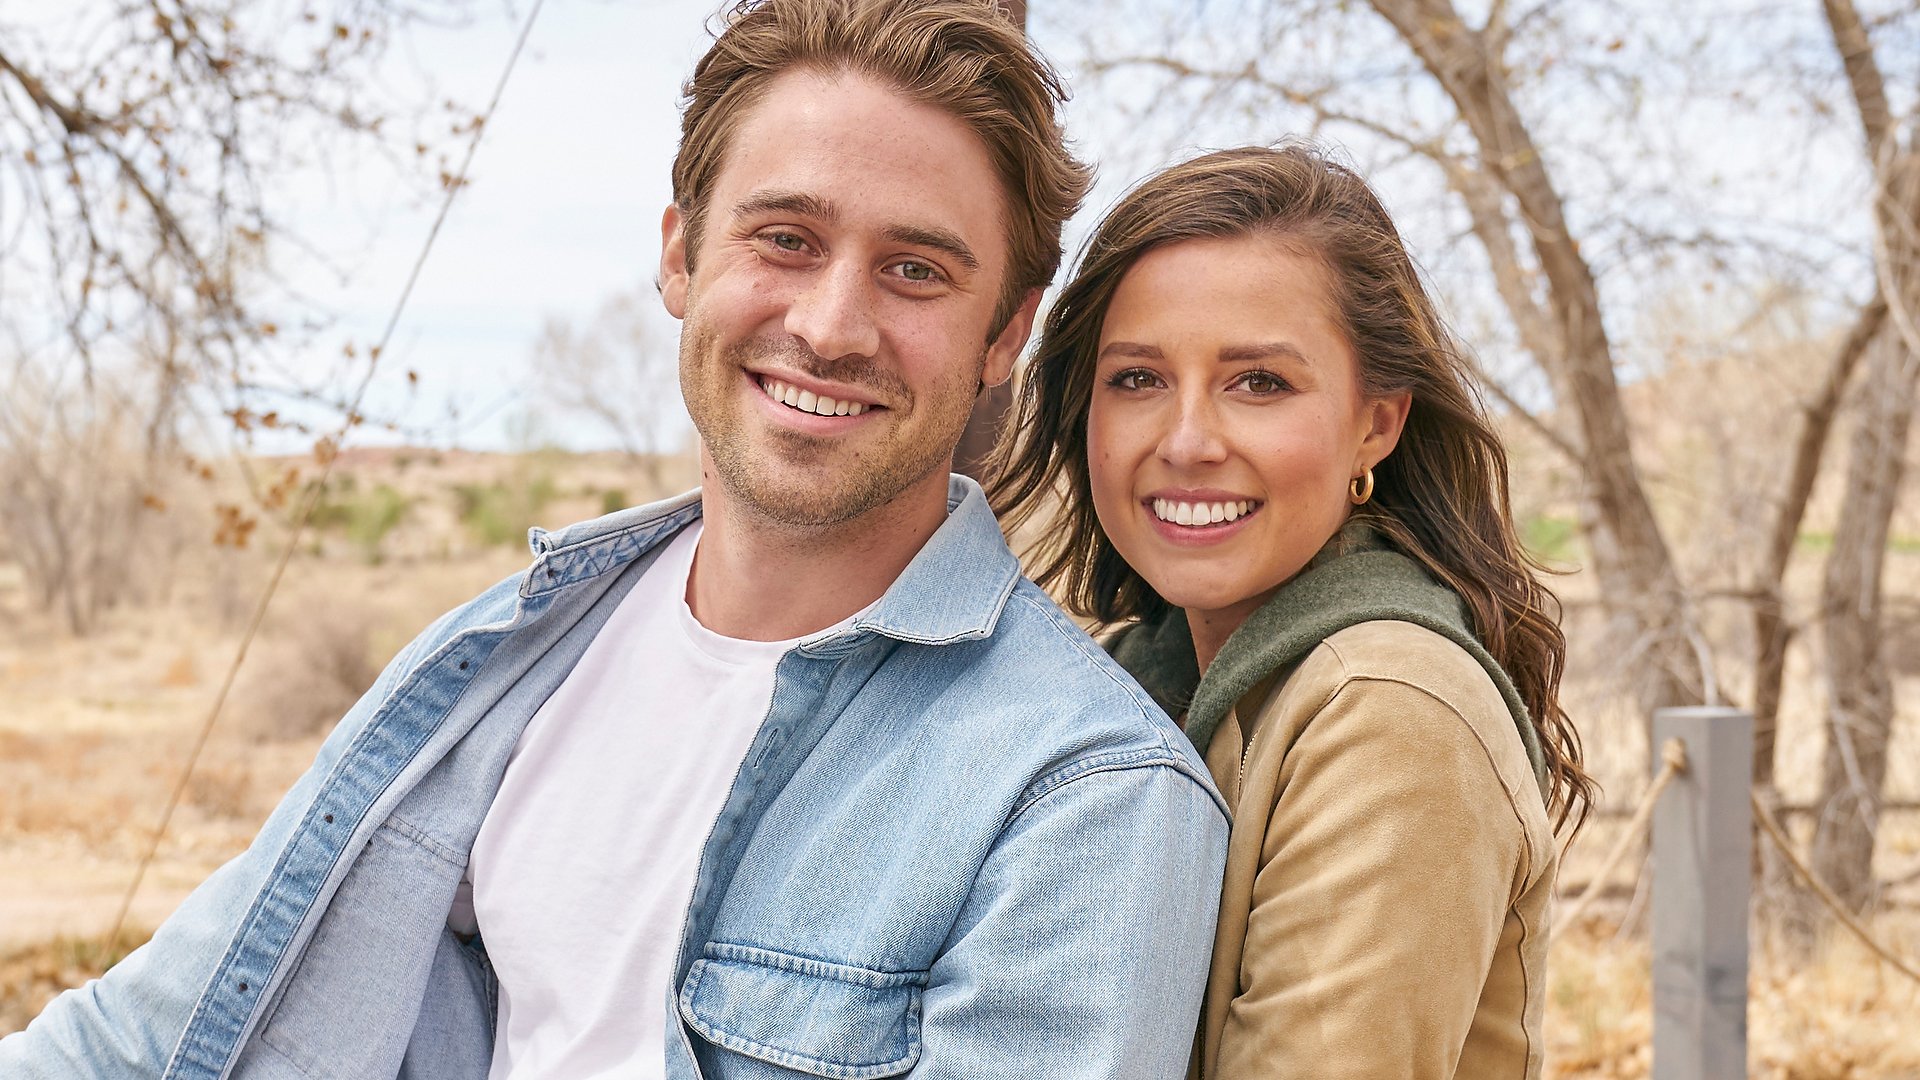 Greg Grippo and Katie Thurston pose together on a bike on their Hometown Date in ‘The Bachelorette’ Season 17 Week 9